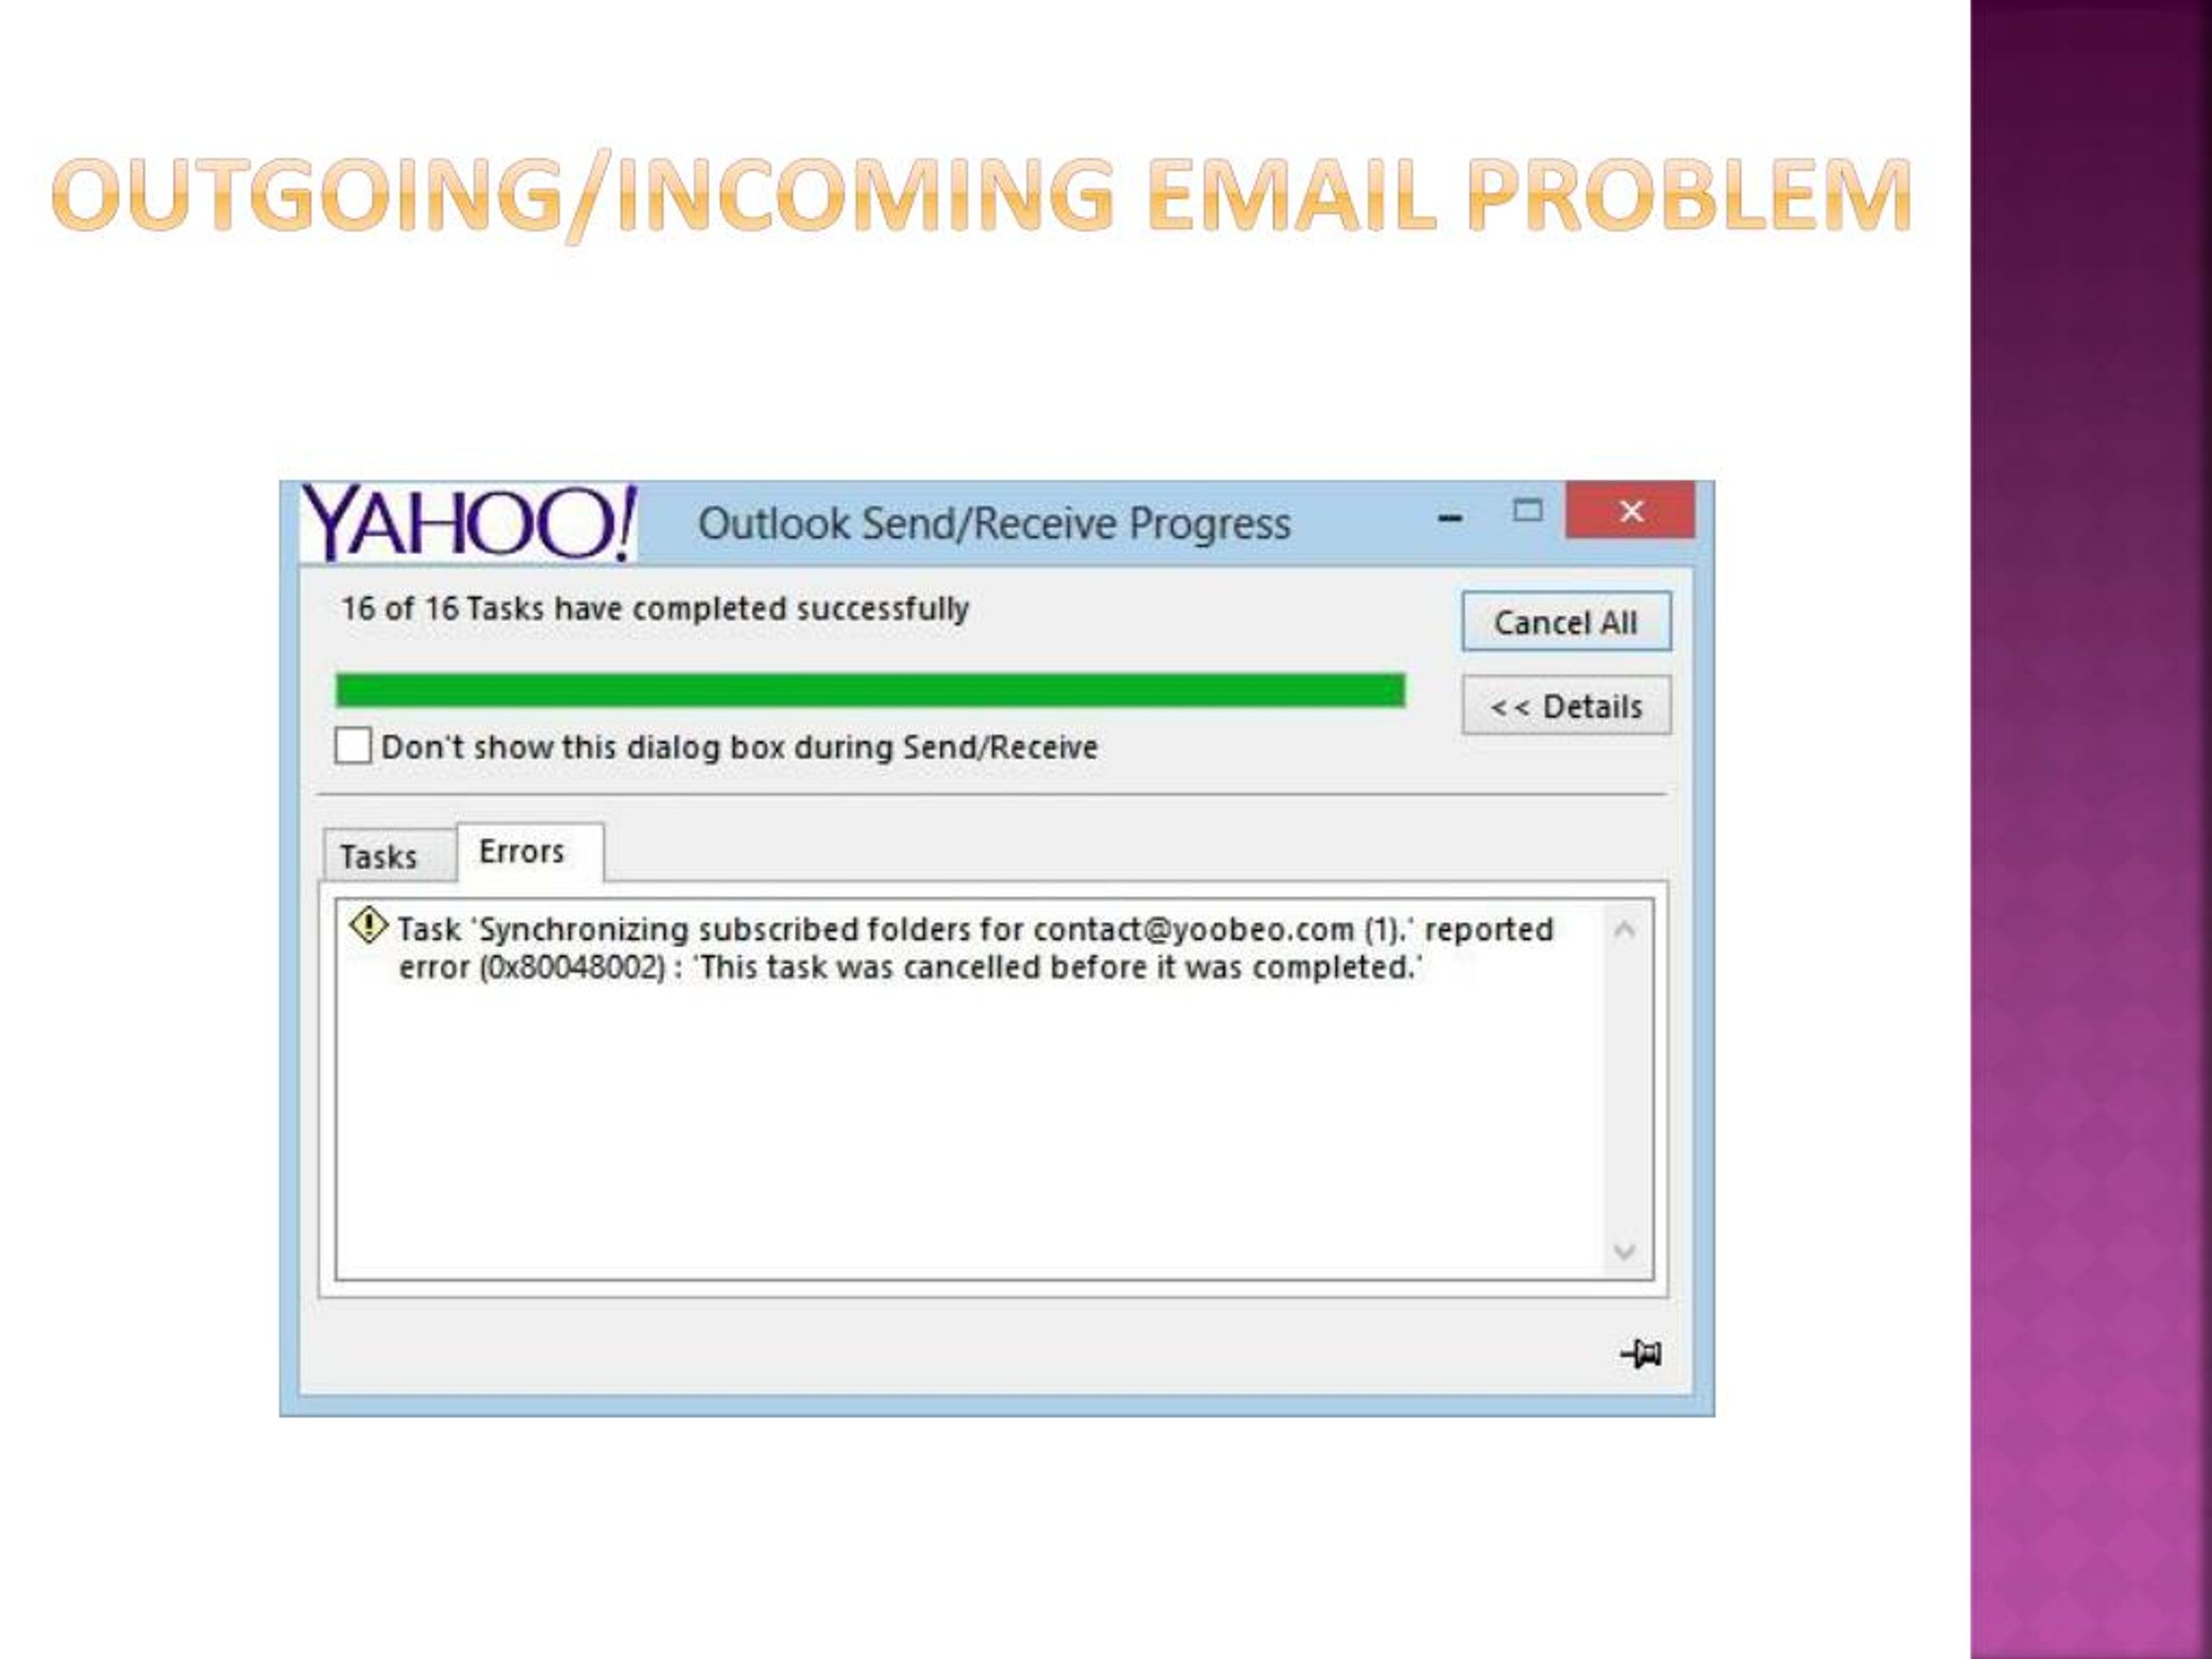 PPT How to Troubleshoot Yahoo Email Issues 8448883860 PowerPoint